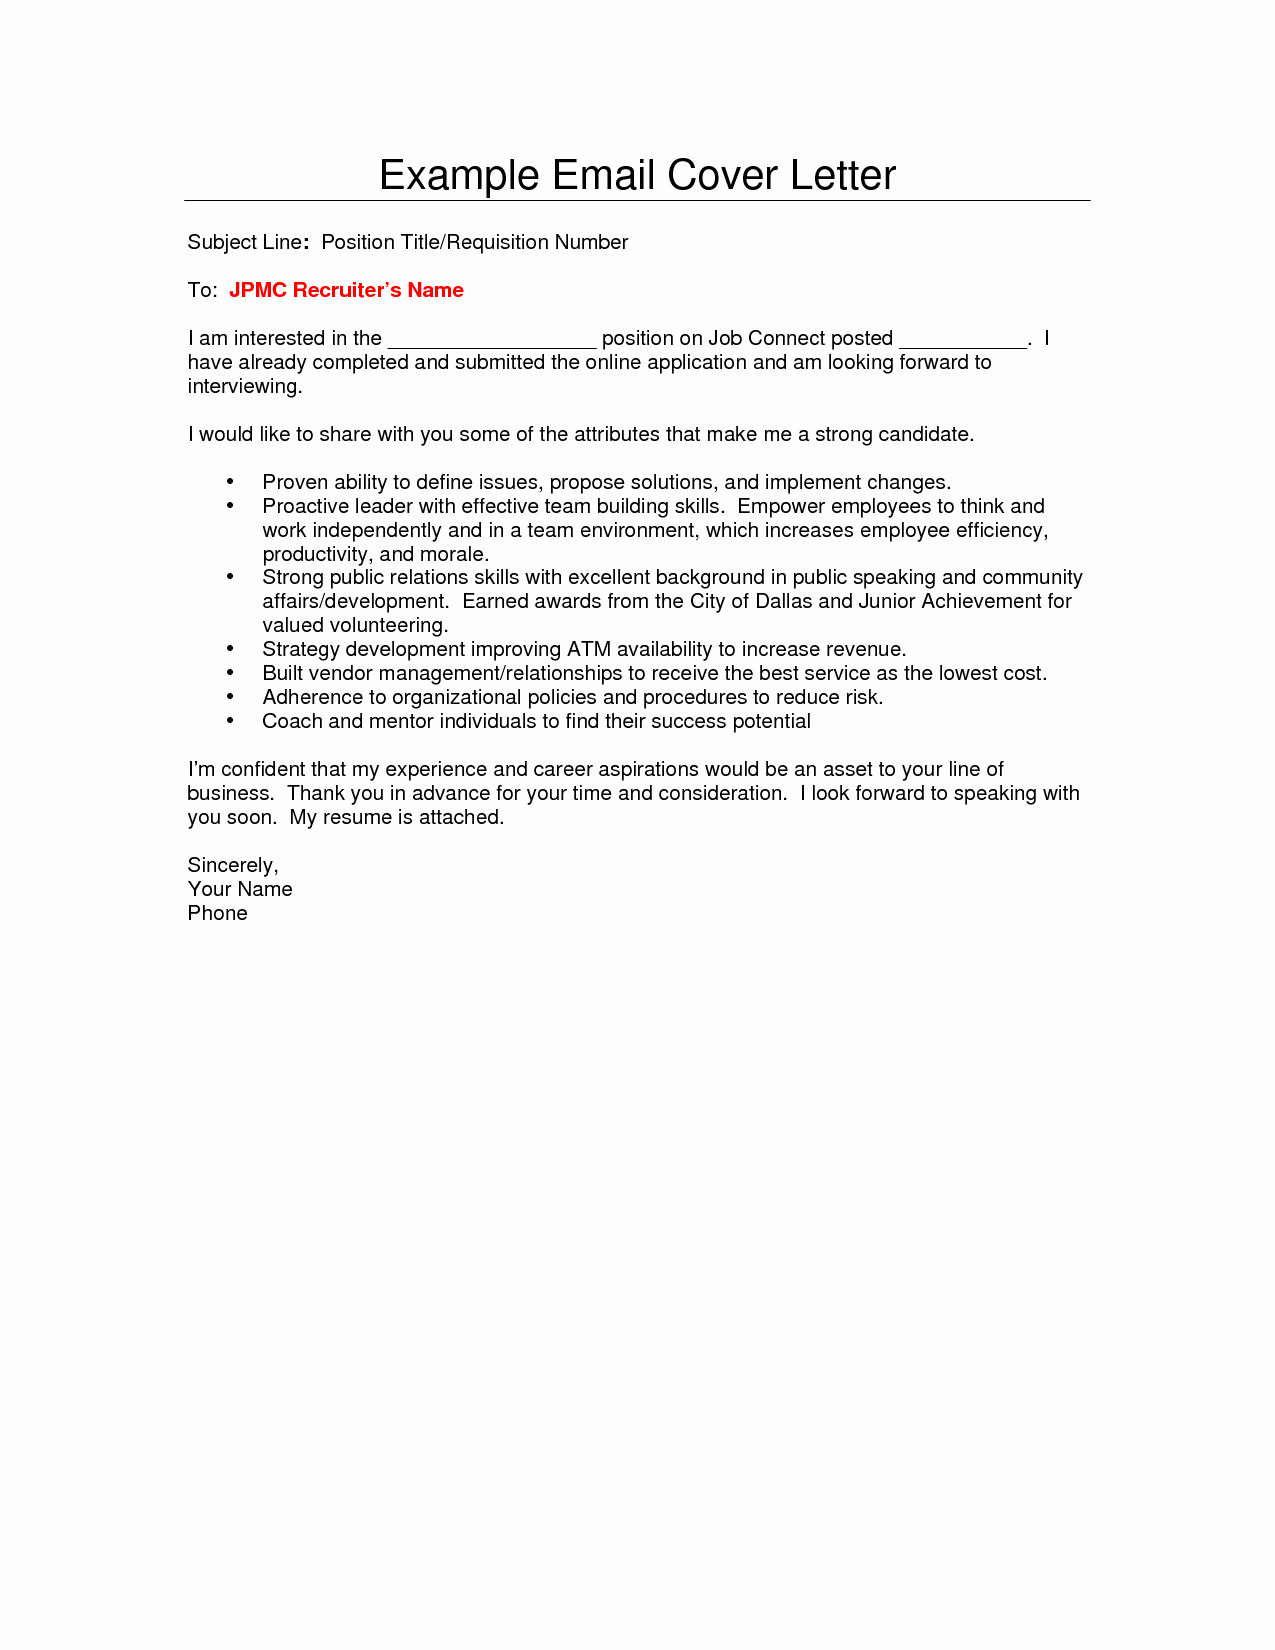 Samples Of Email Cover Letters Luxury Email Cover Letter Sample